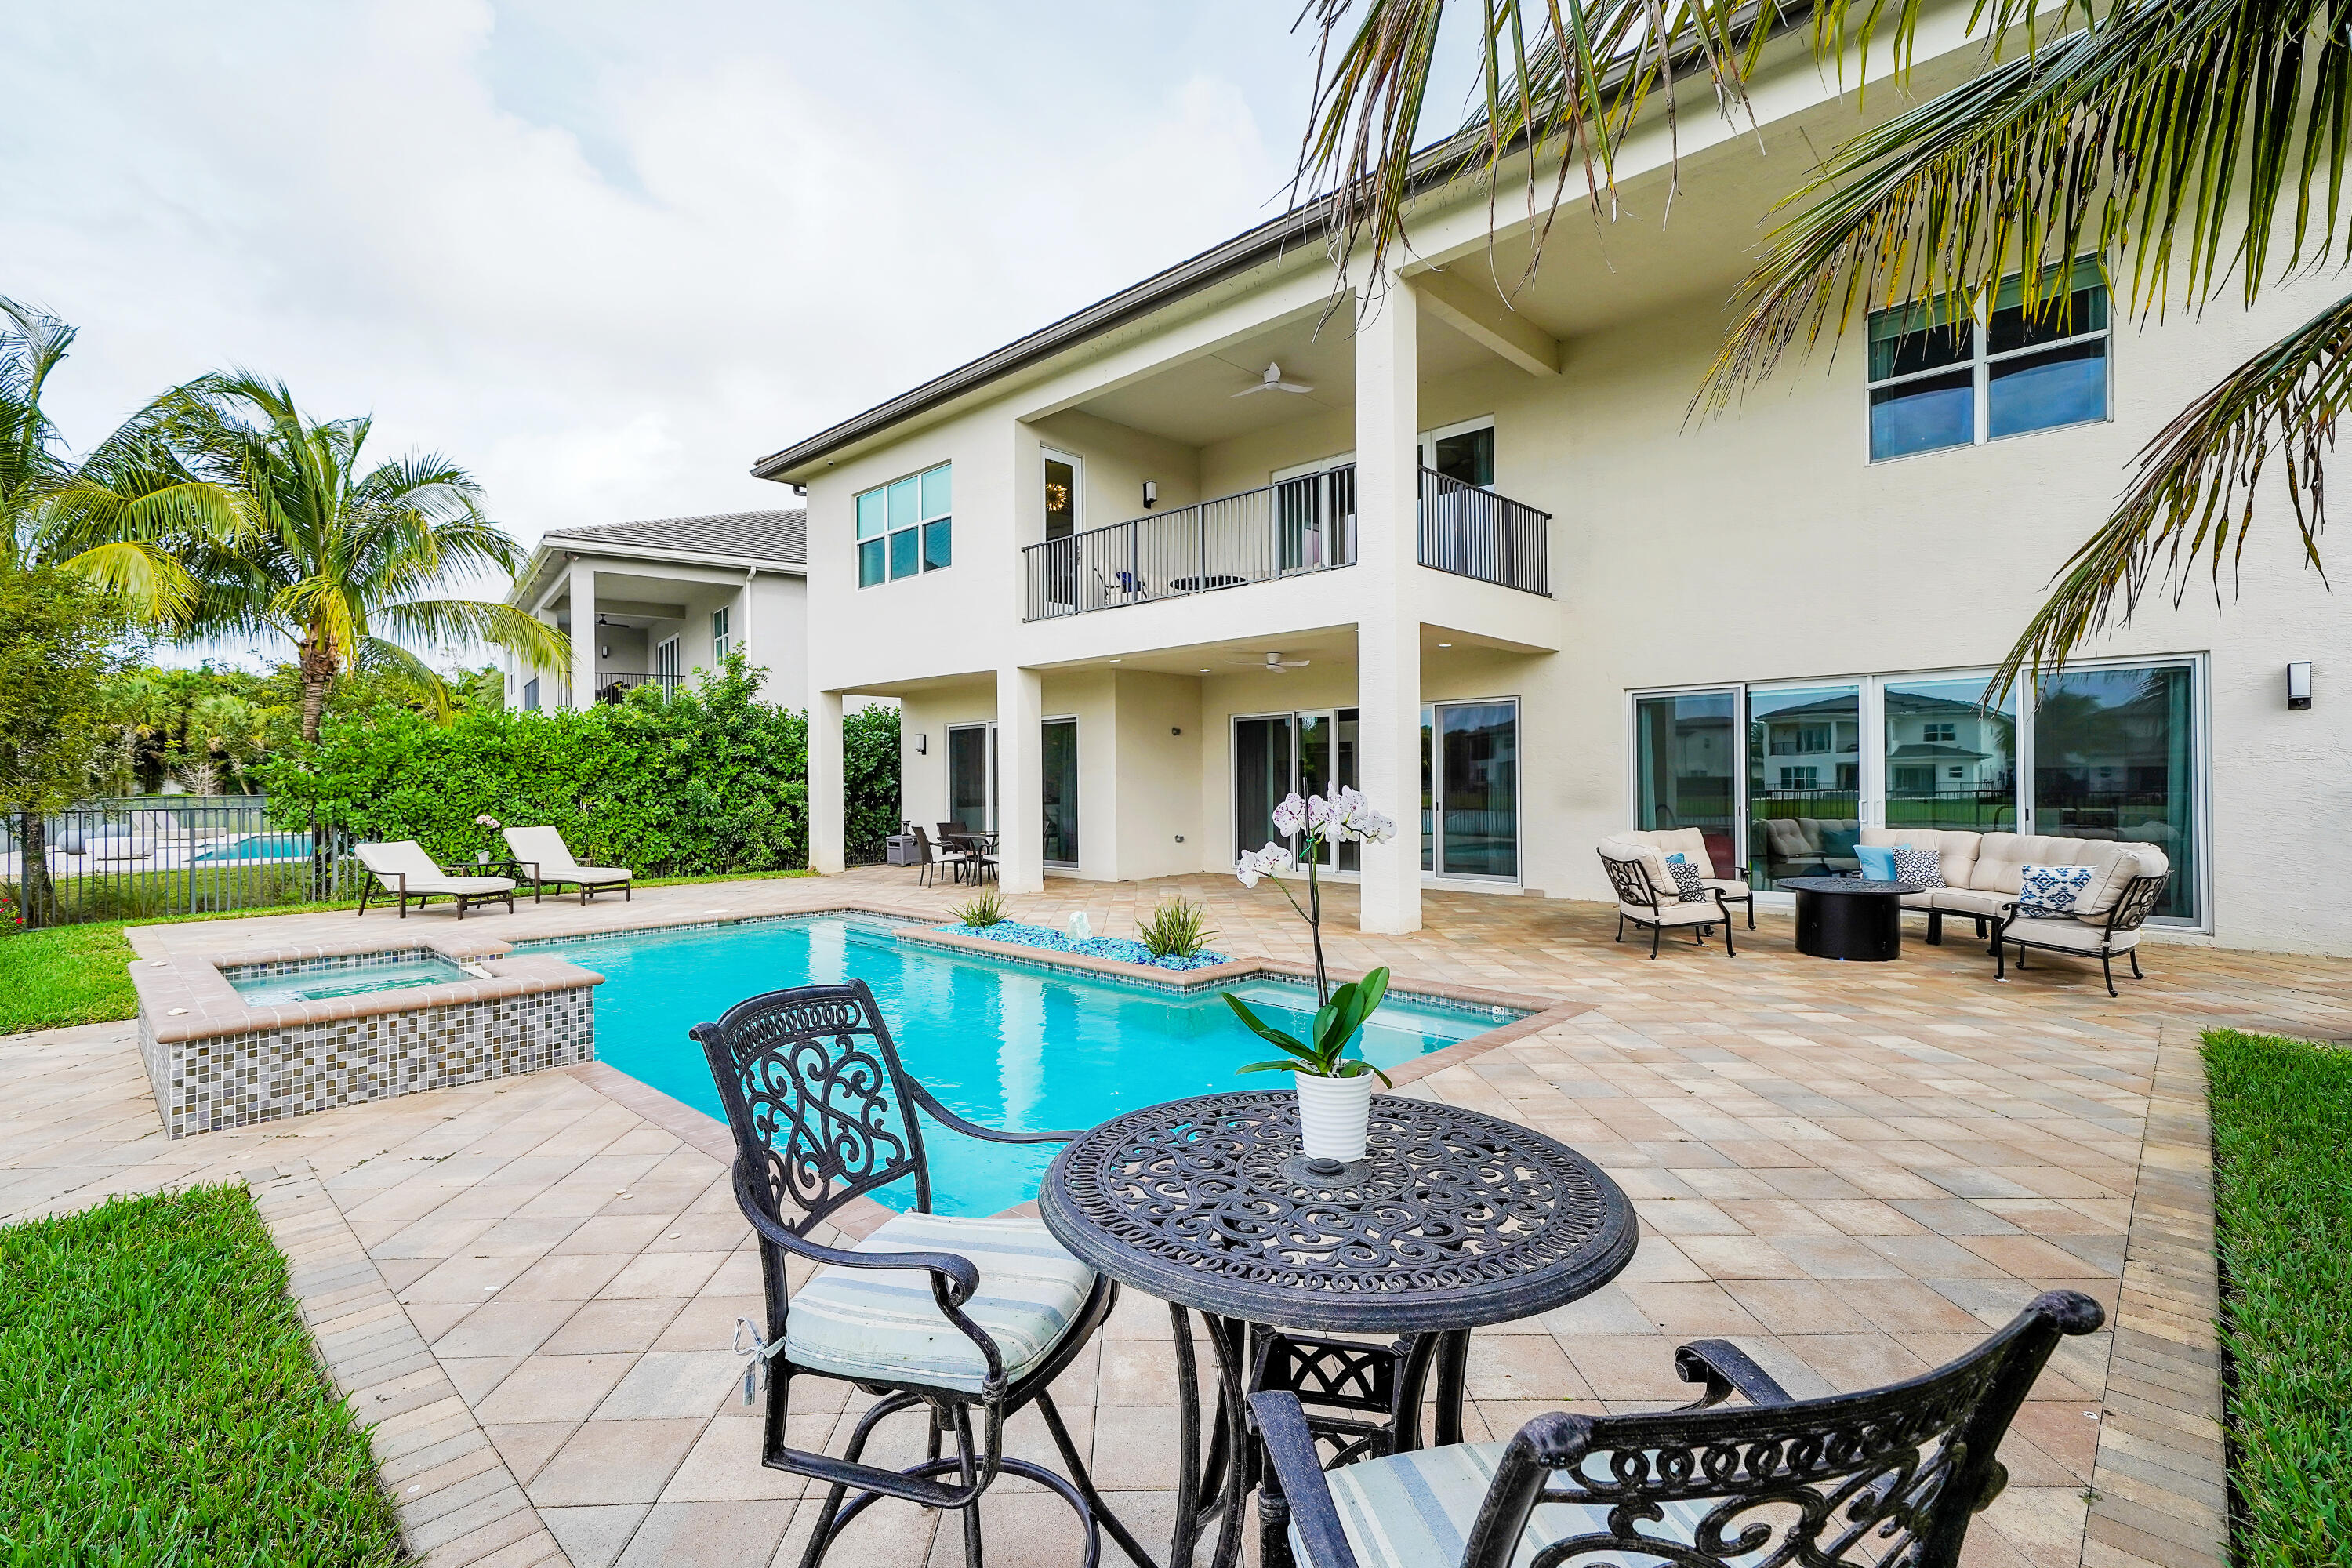 Property for Sale at 19871 Meadowside Lane, Boca Raton, Palm Beach County, Florida - Bedrooms: 5 
Bathrooms: 5.5  - $2,399,400